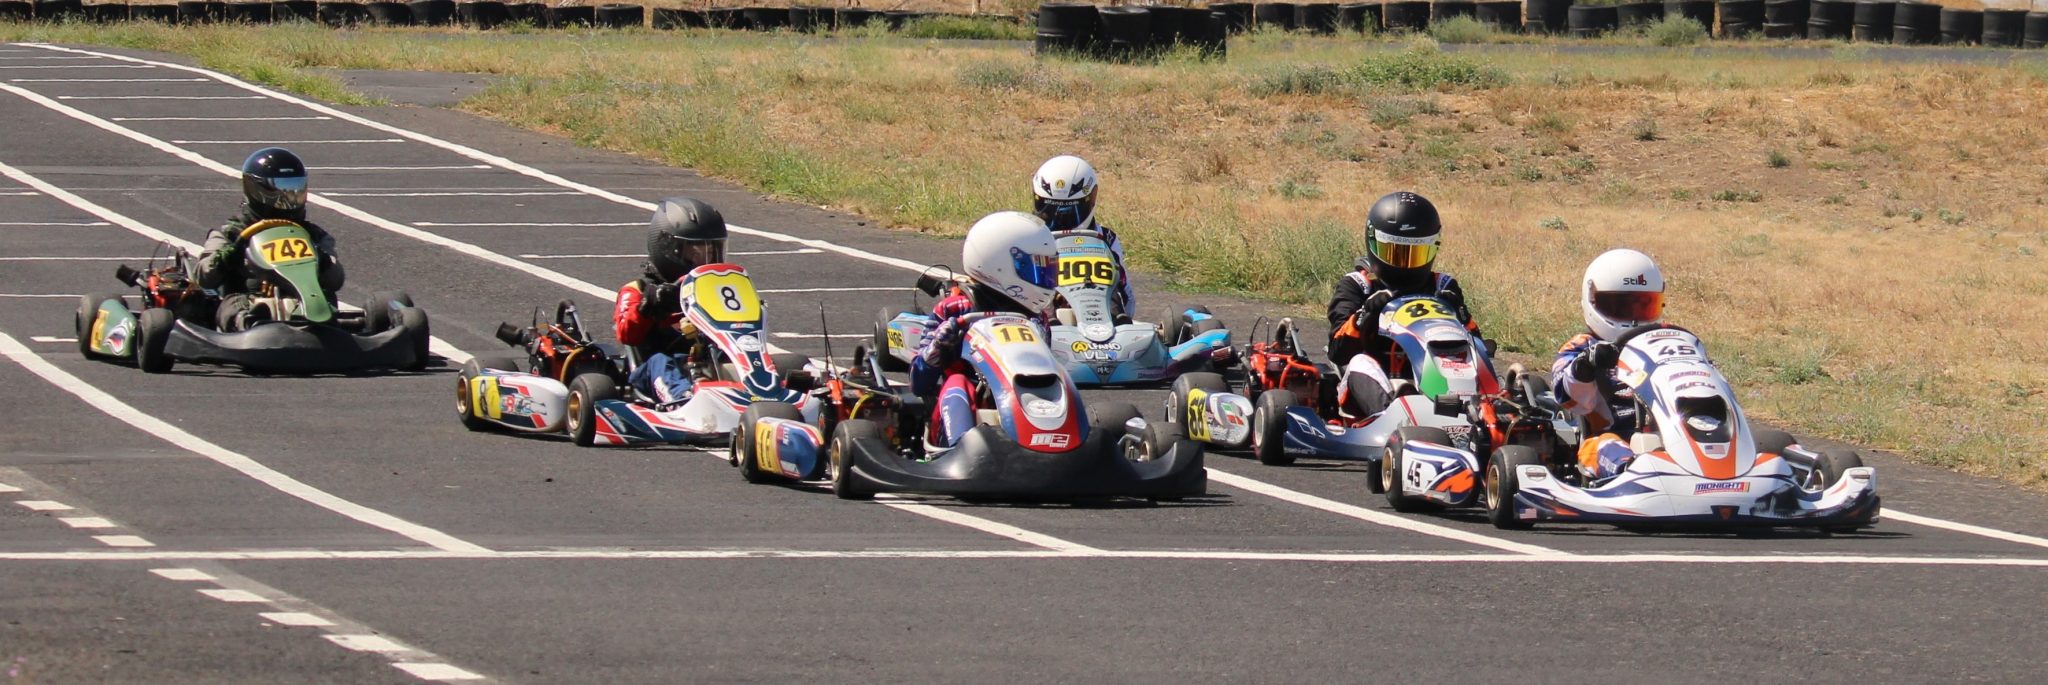 karts staging for a race